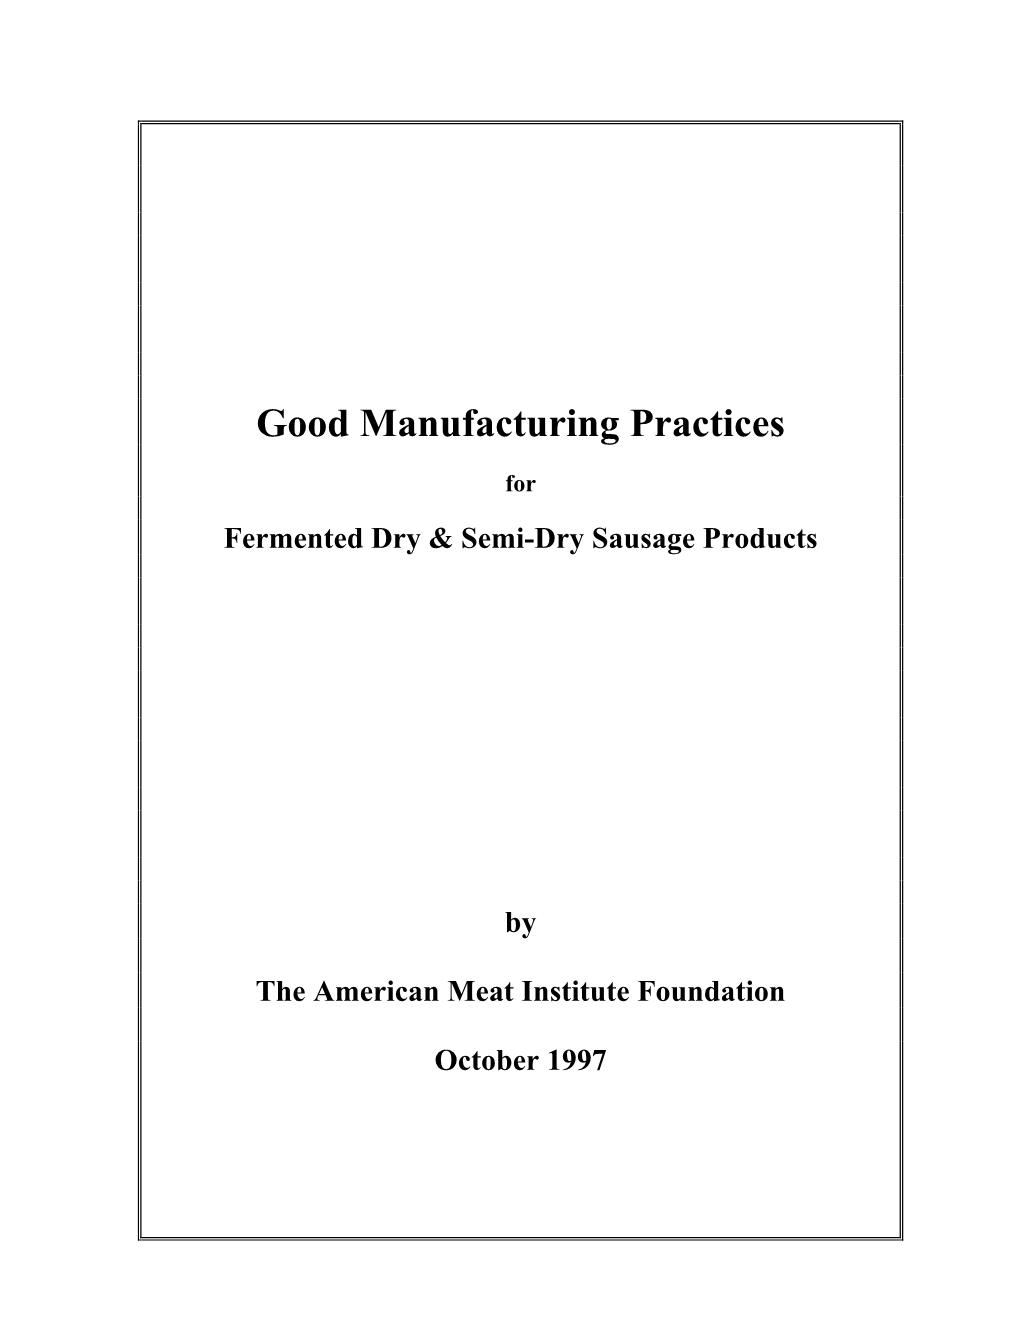 Good Manufacturing Practices For